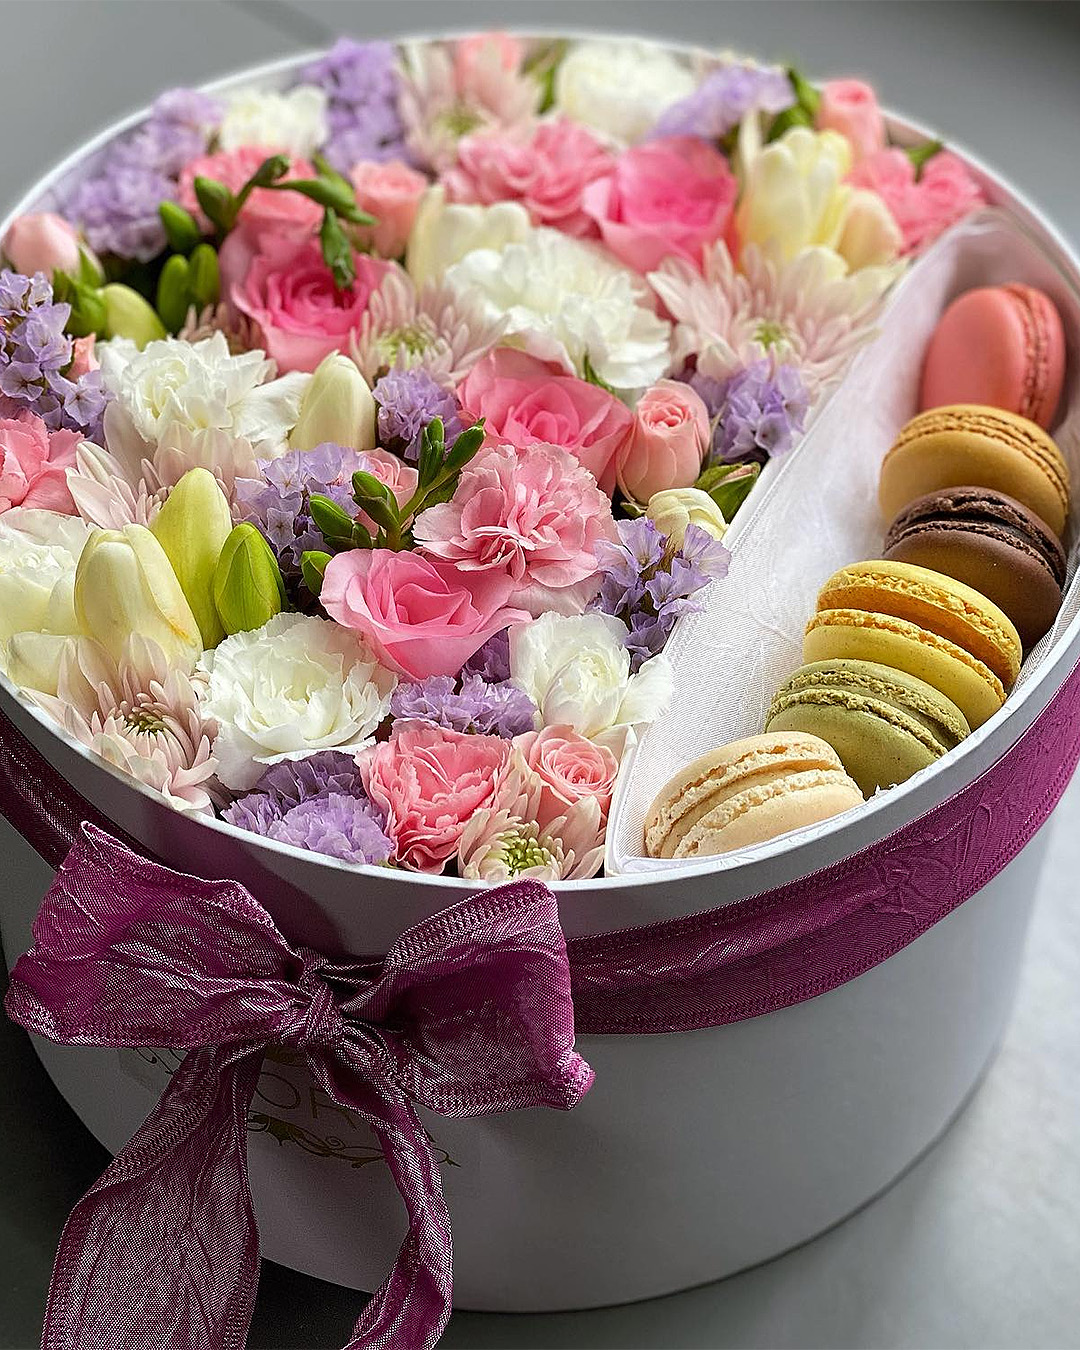 Flowers with a little side of macarons from Istoria.